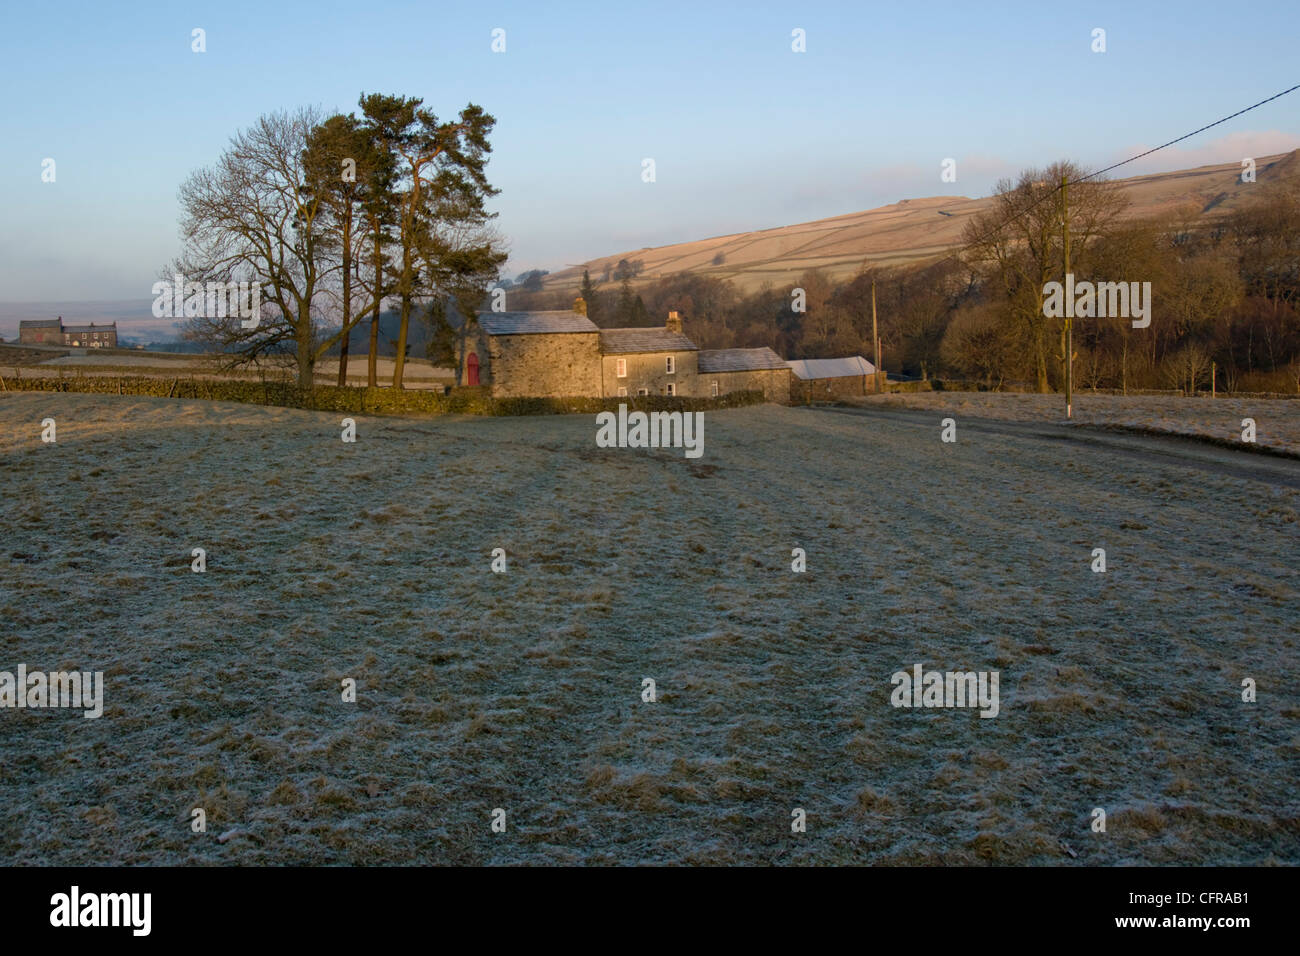 Frosty field leading to farmhouse and outbuildings in Pennines Stock Photo